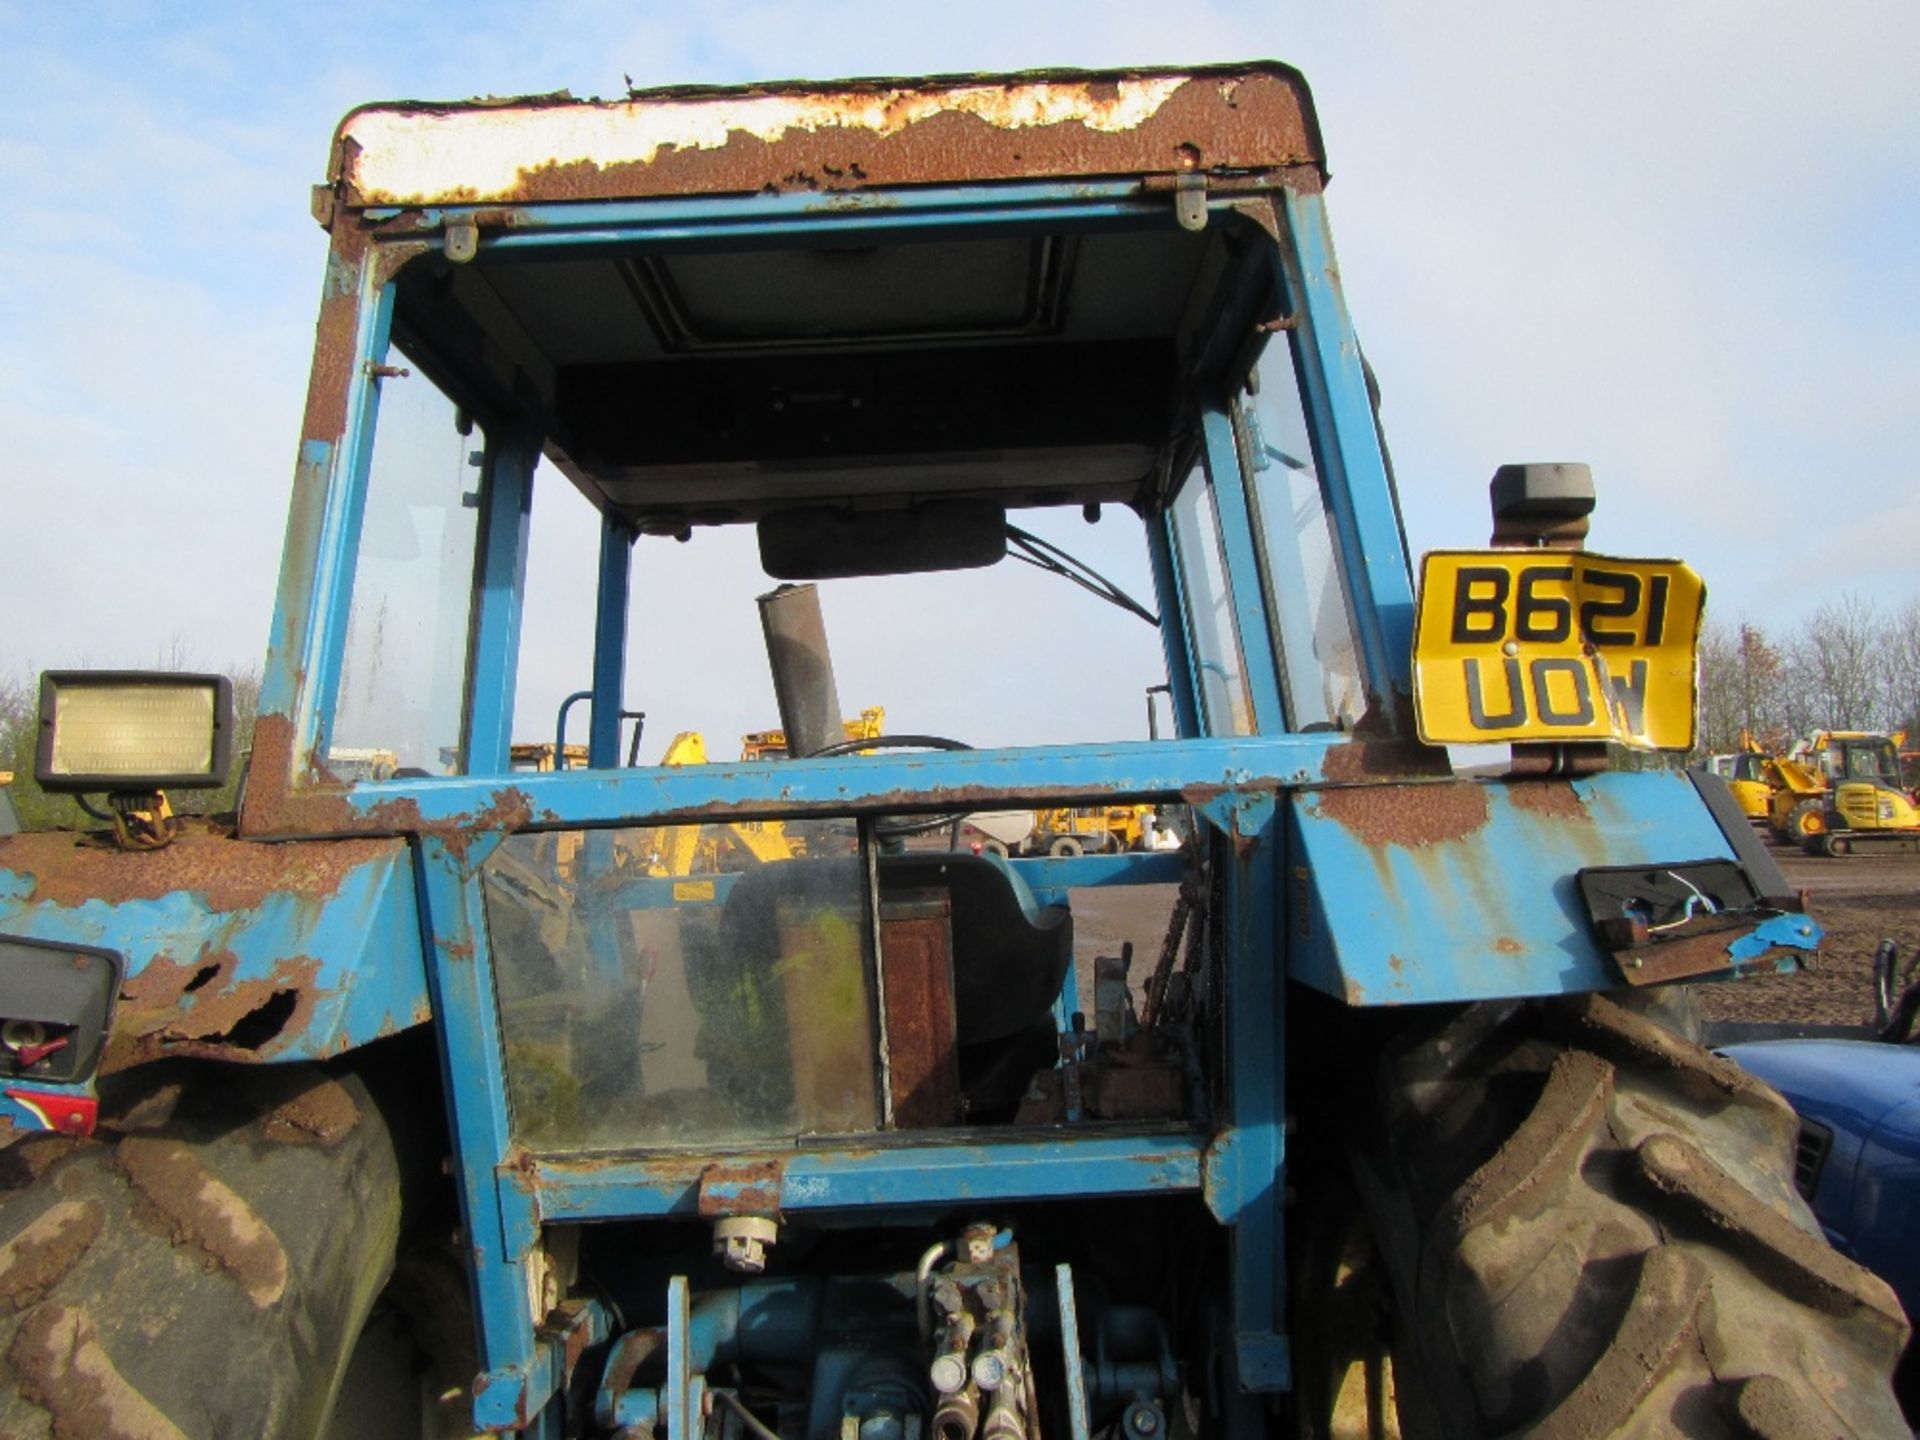 Ford 5610 2wd Tractor c/w Floor Change Gearbox. Reg. No. B621 UOW Ser. No. BA22021 - Image 7 of 10